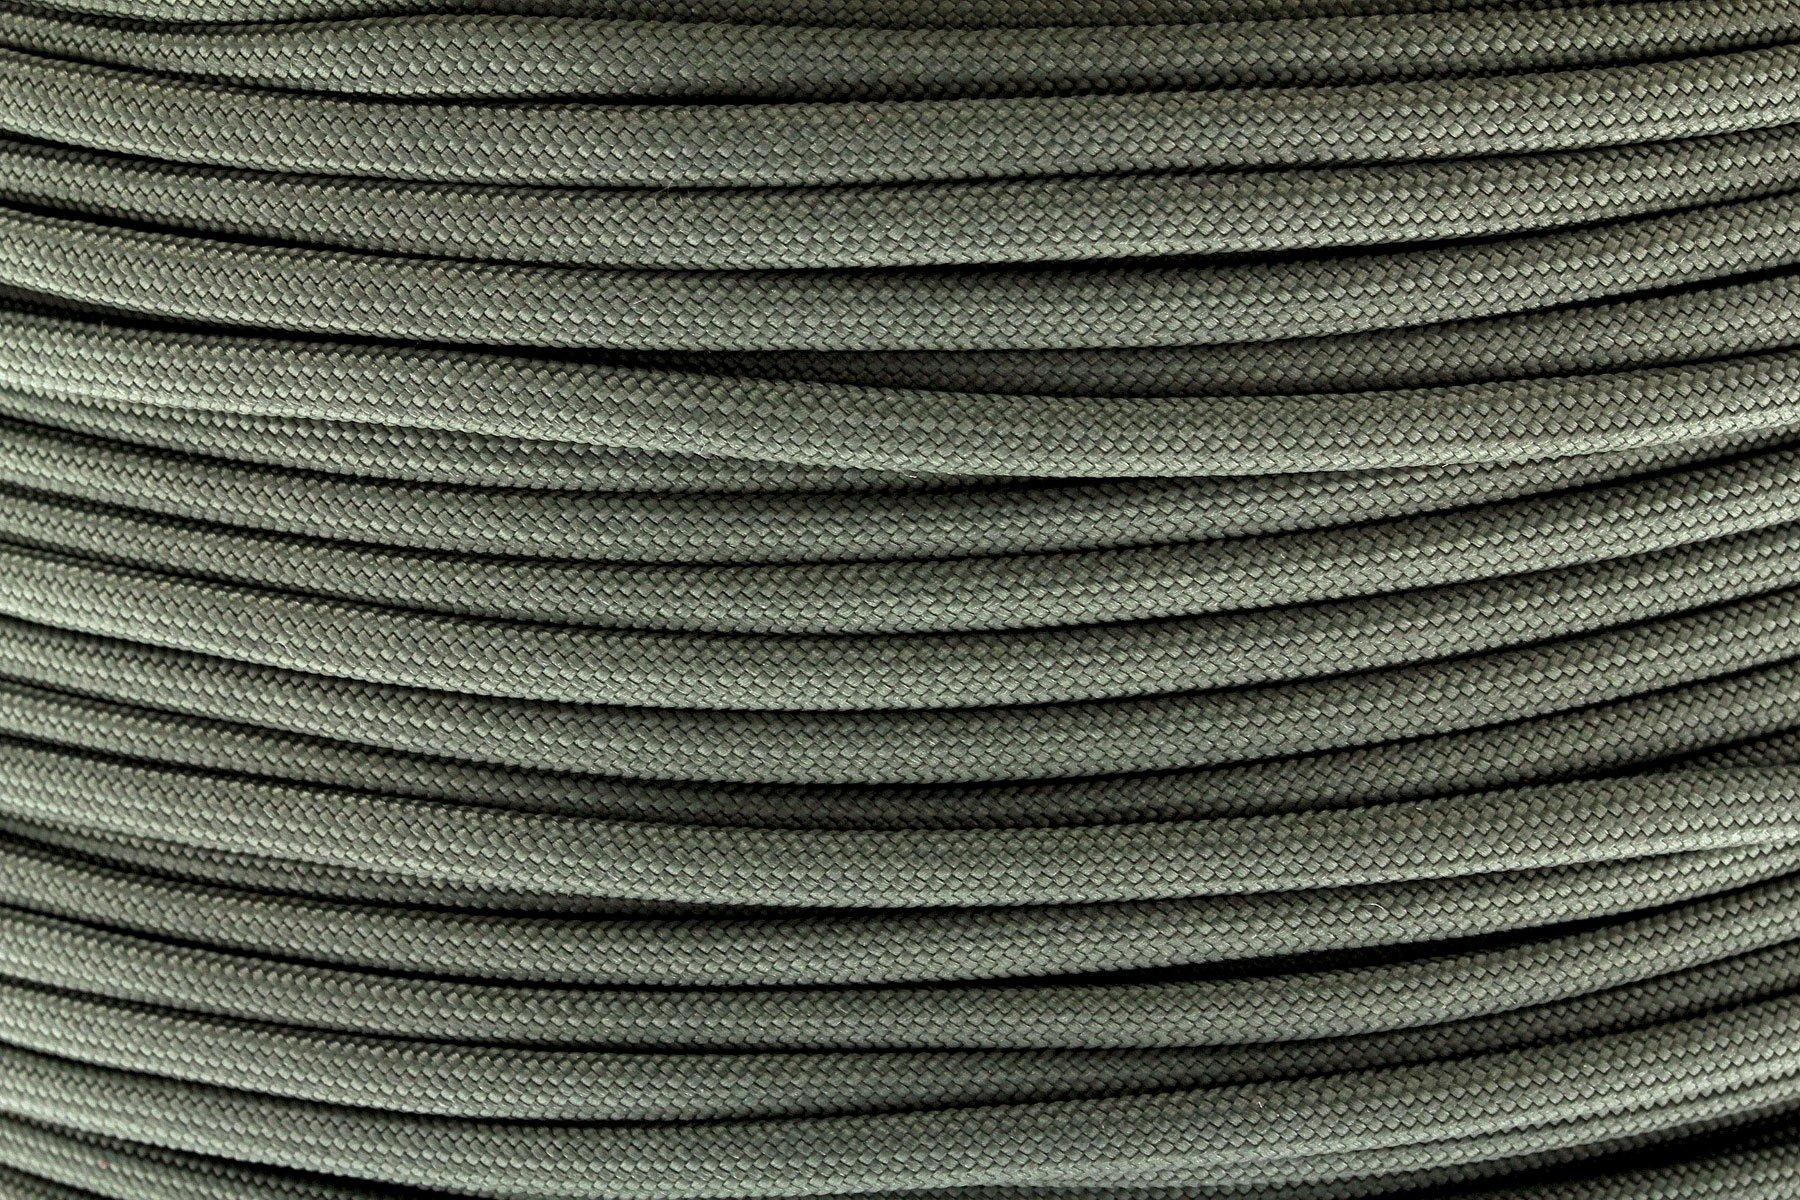 550 Paracord type III, color: Black, 1000 ft (304.8 m)